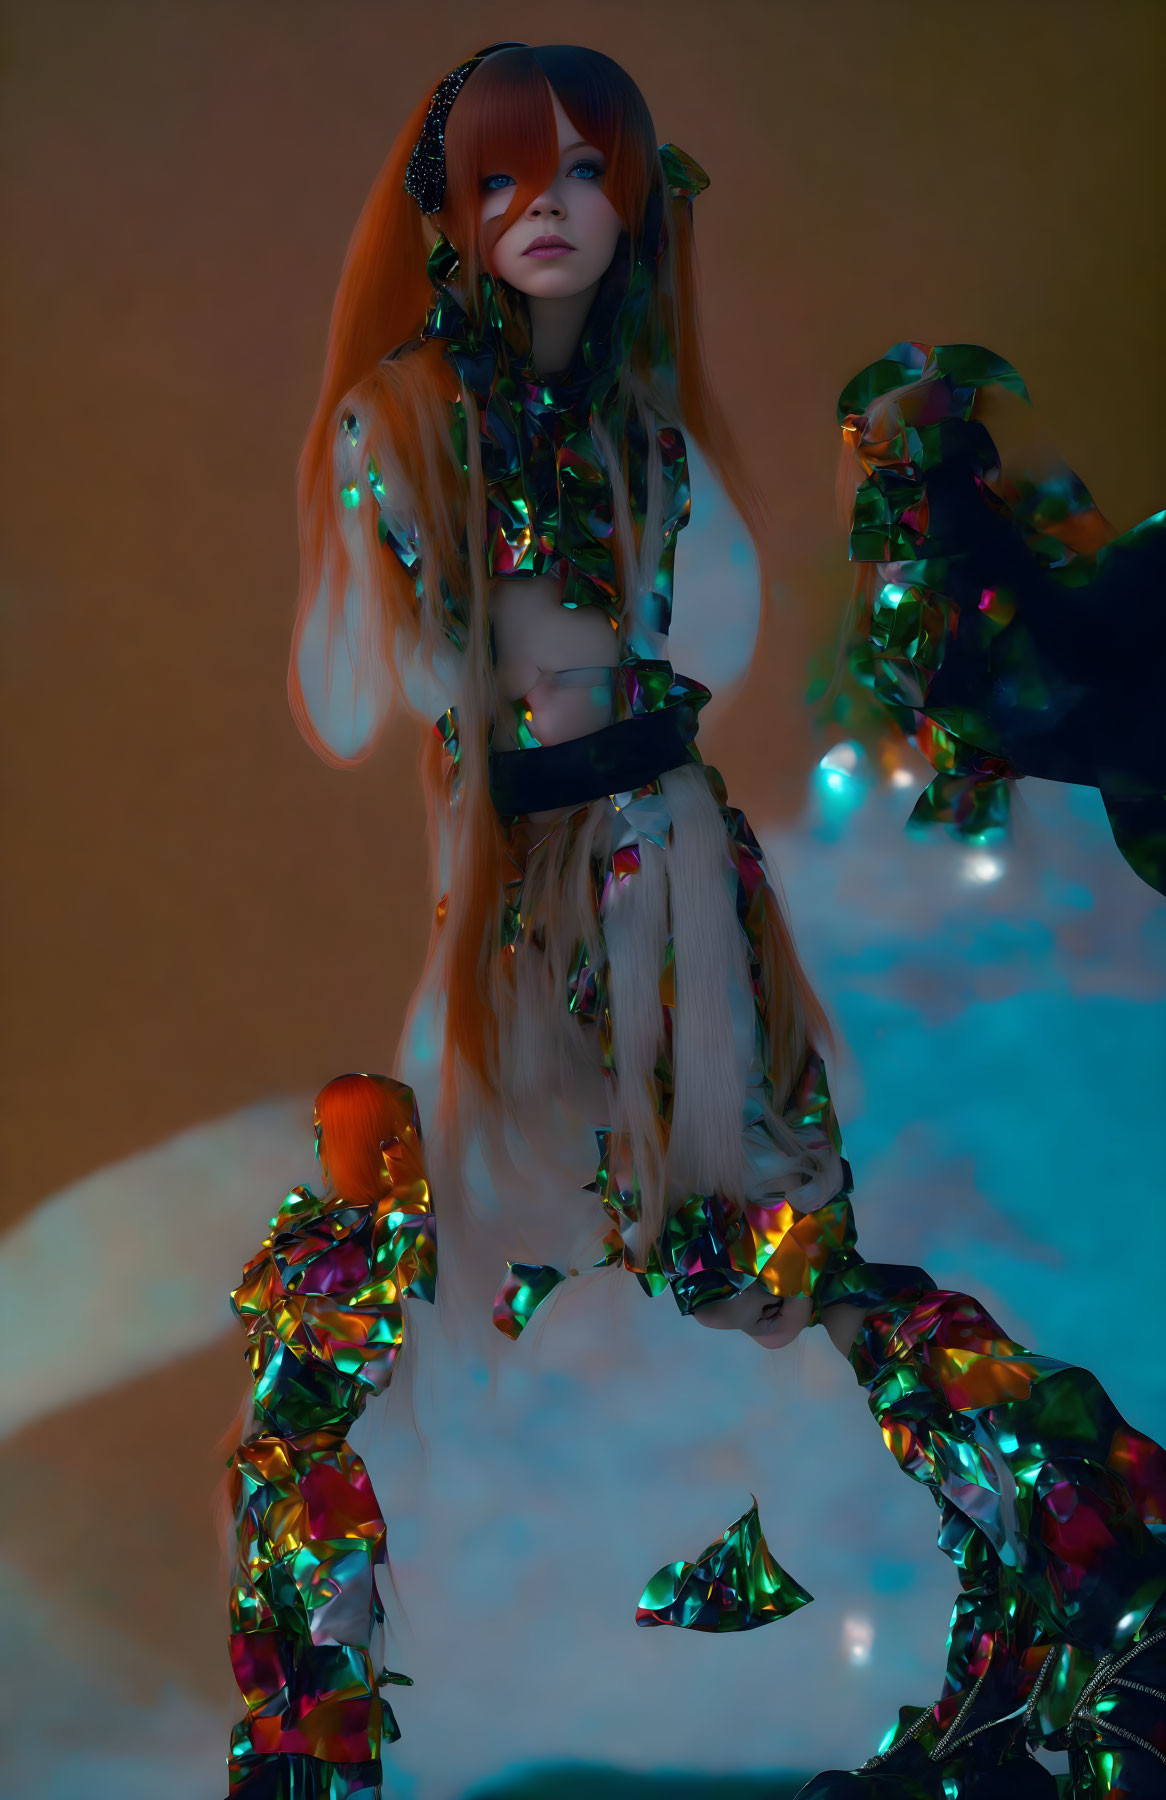 Long orange hair person in metallic outfit against futuristic background